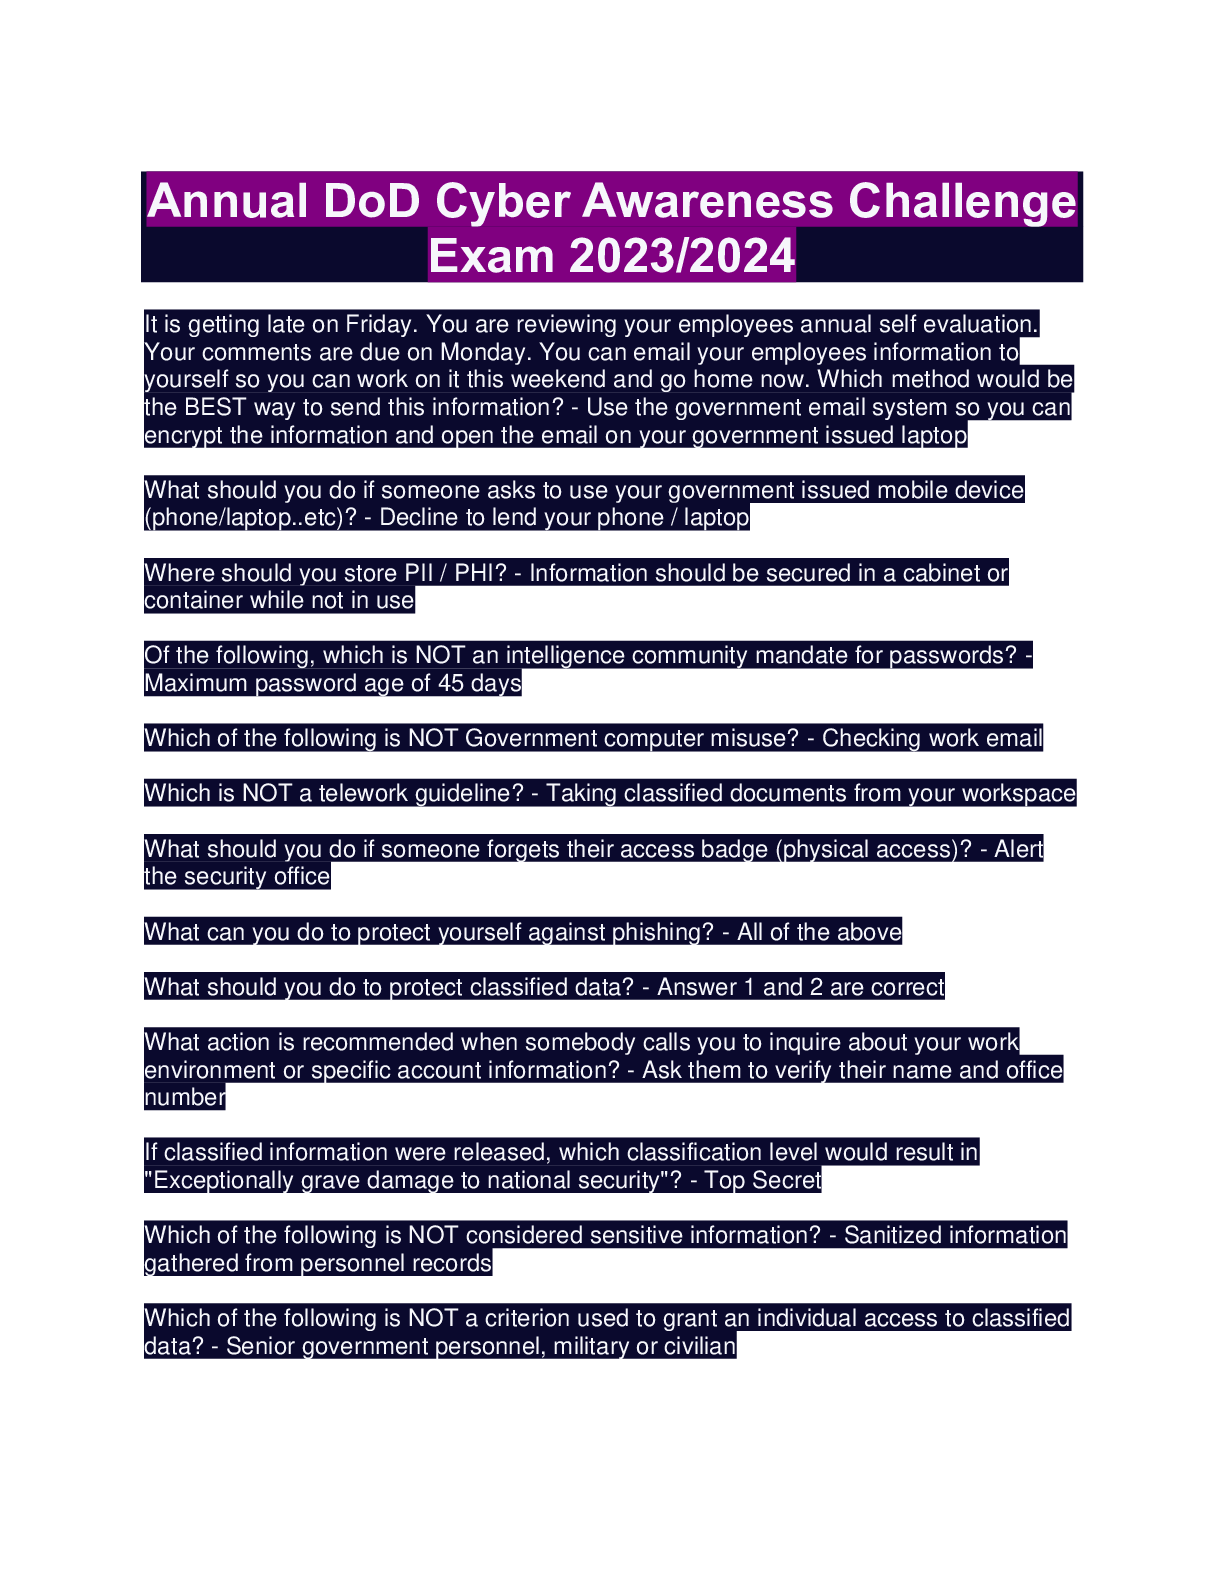 Annual DoD Cyber Awareness Challenge Exam 2023/2024 Browsegrades